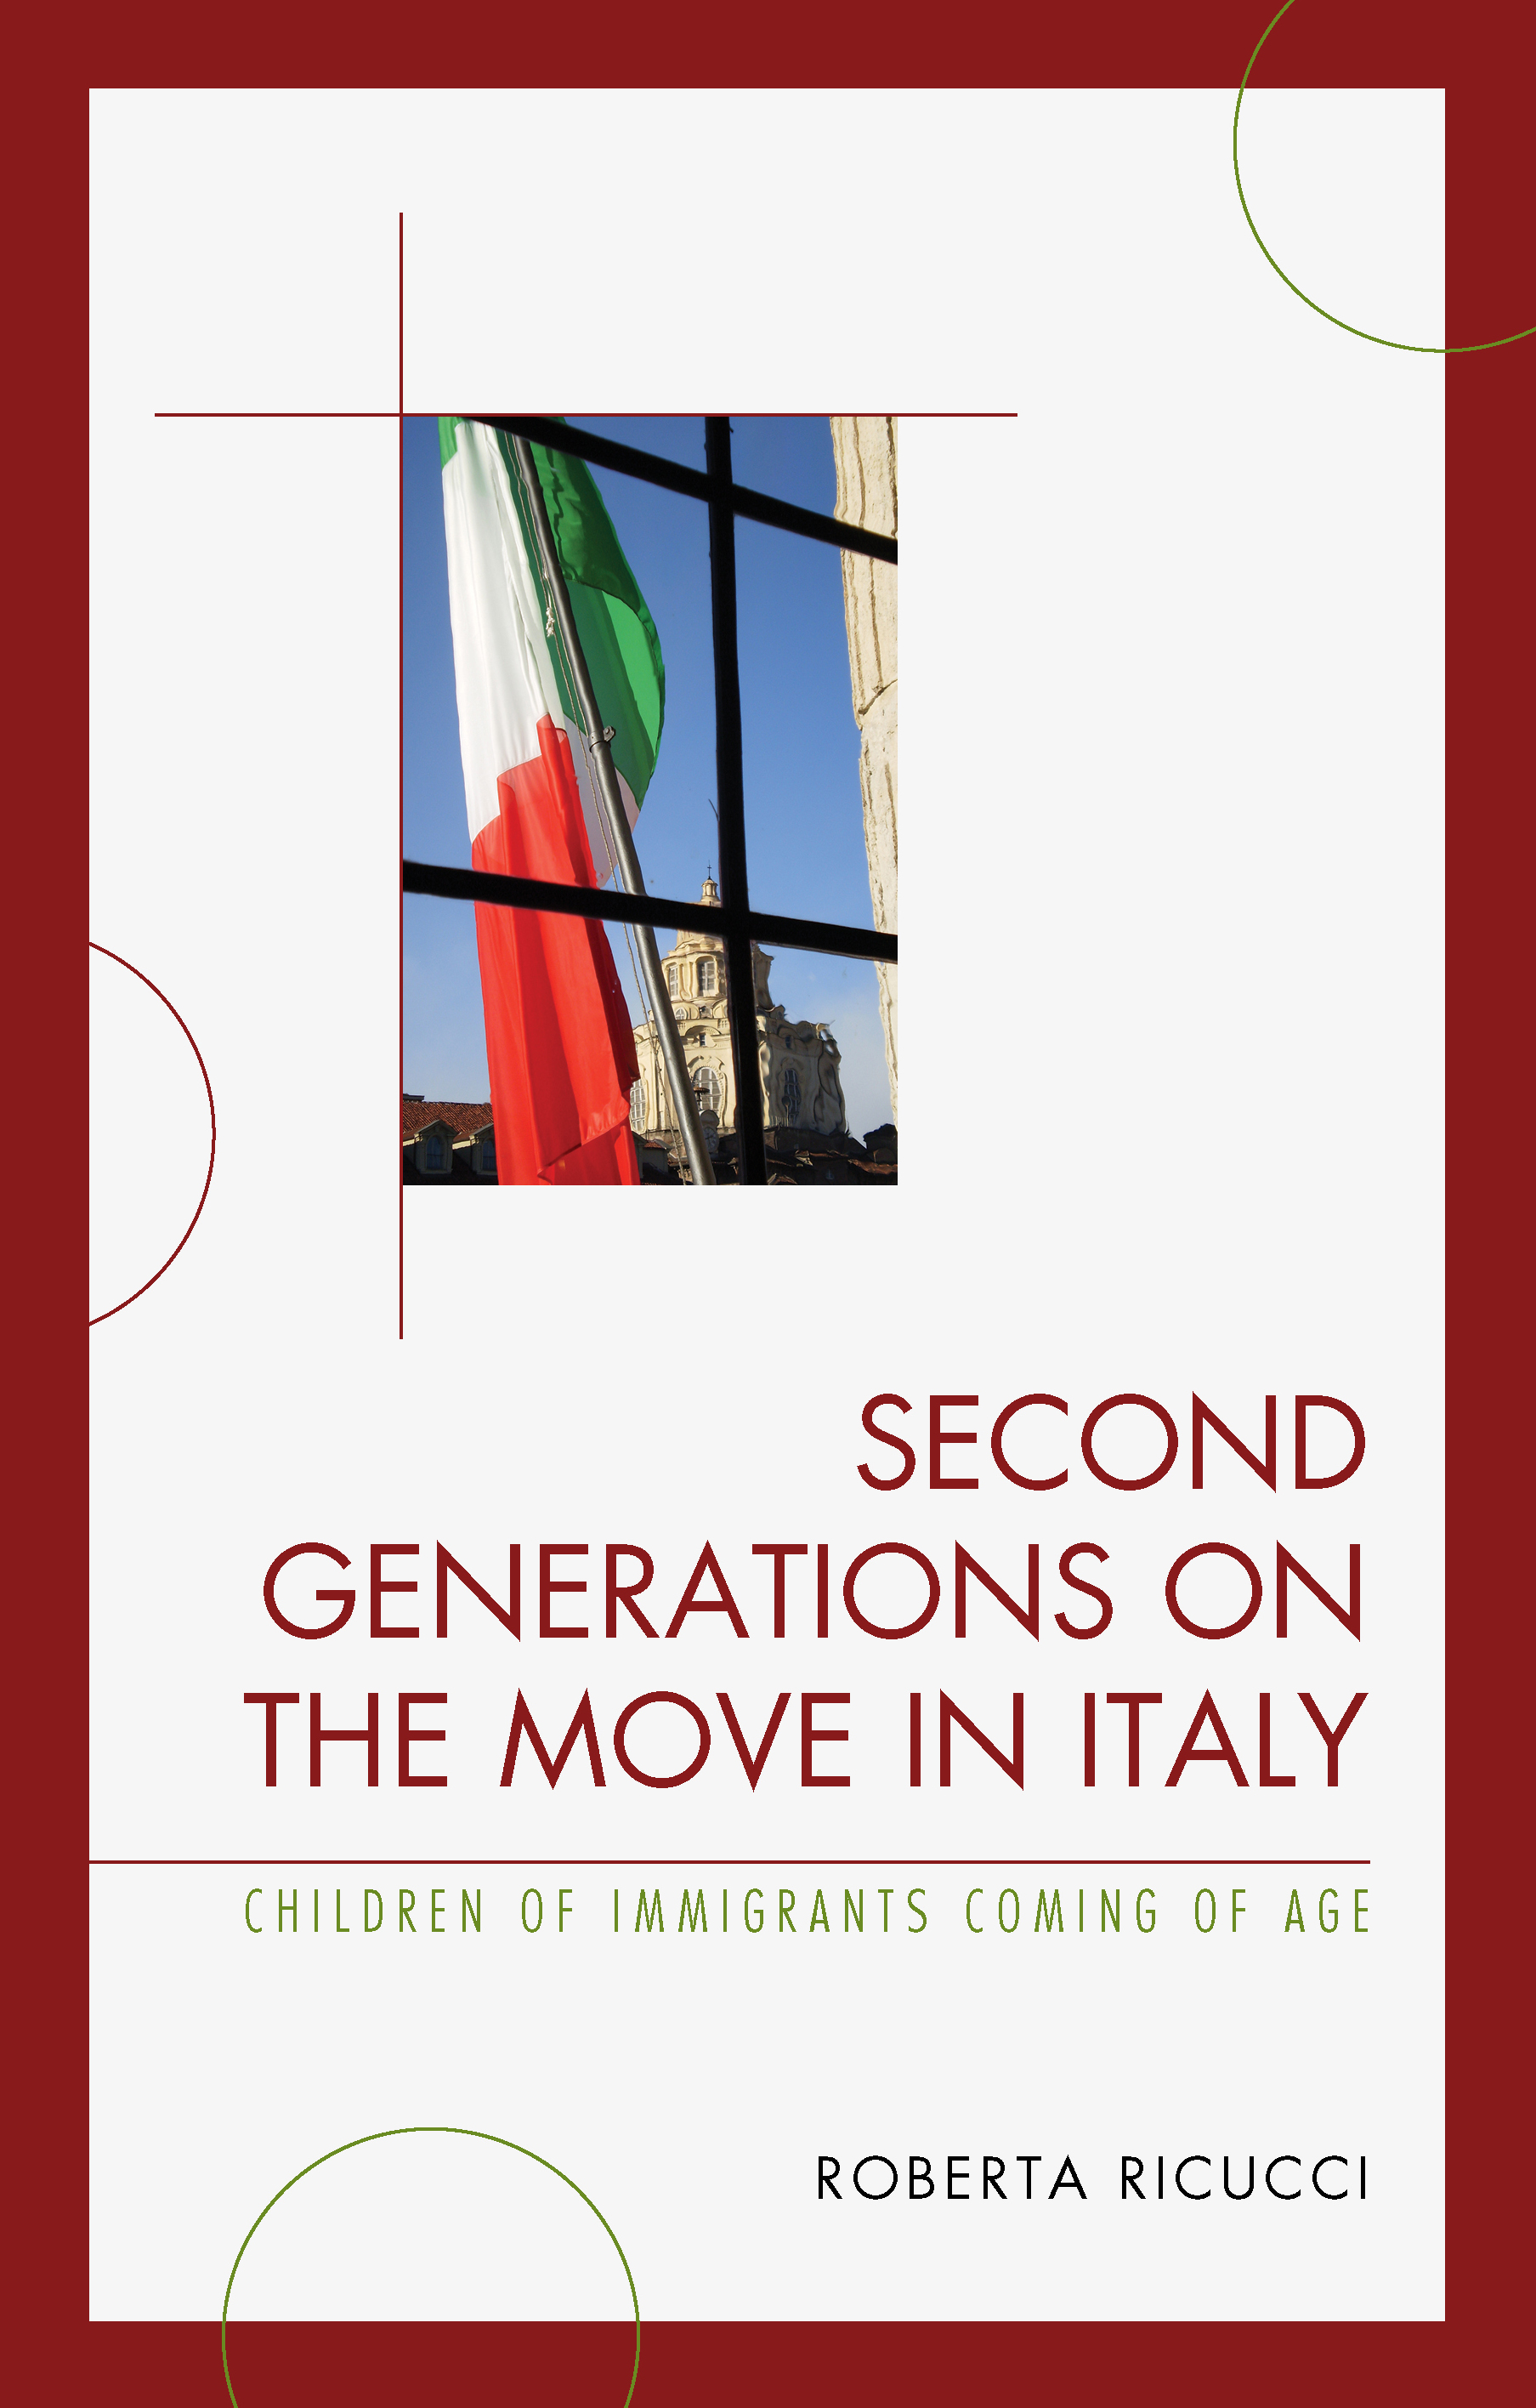 Second Generations on the Move in Italy: Children of Immigrants Coming of Age